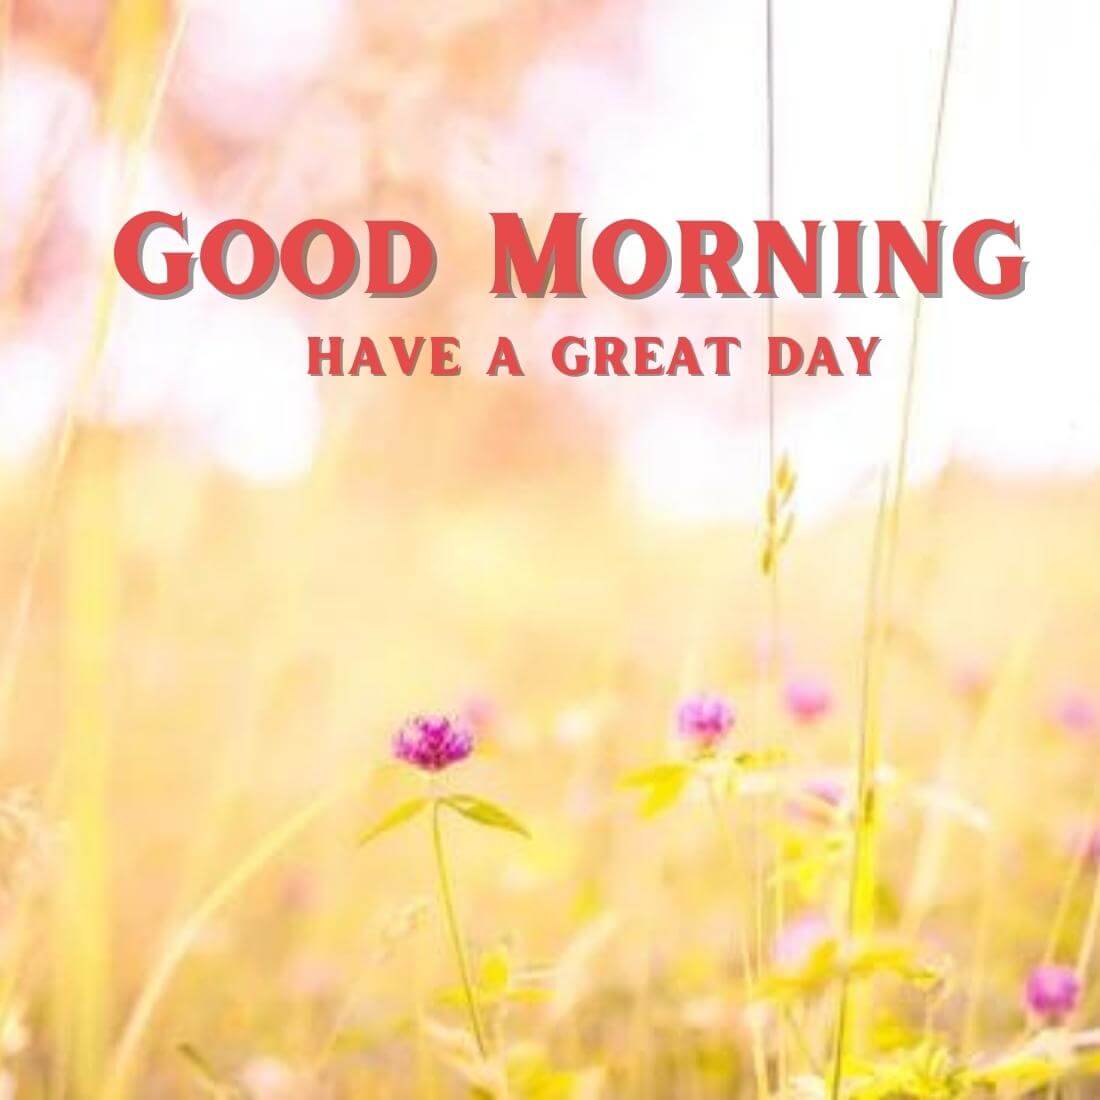 Wonderful Good Morning Wallpaper Free Download for Friend